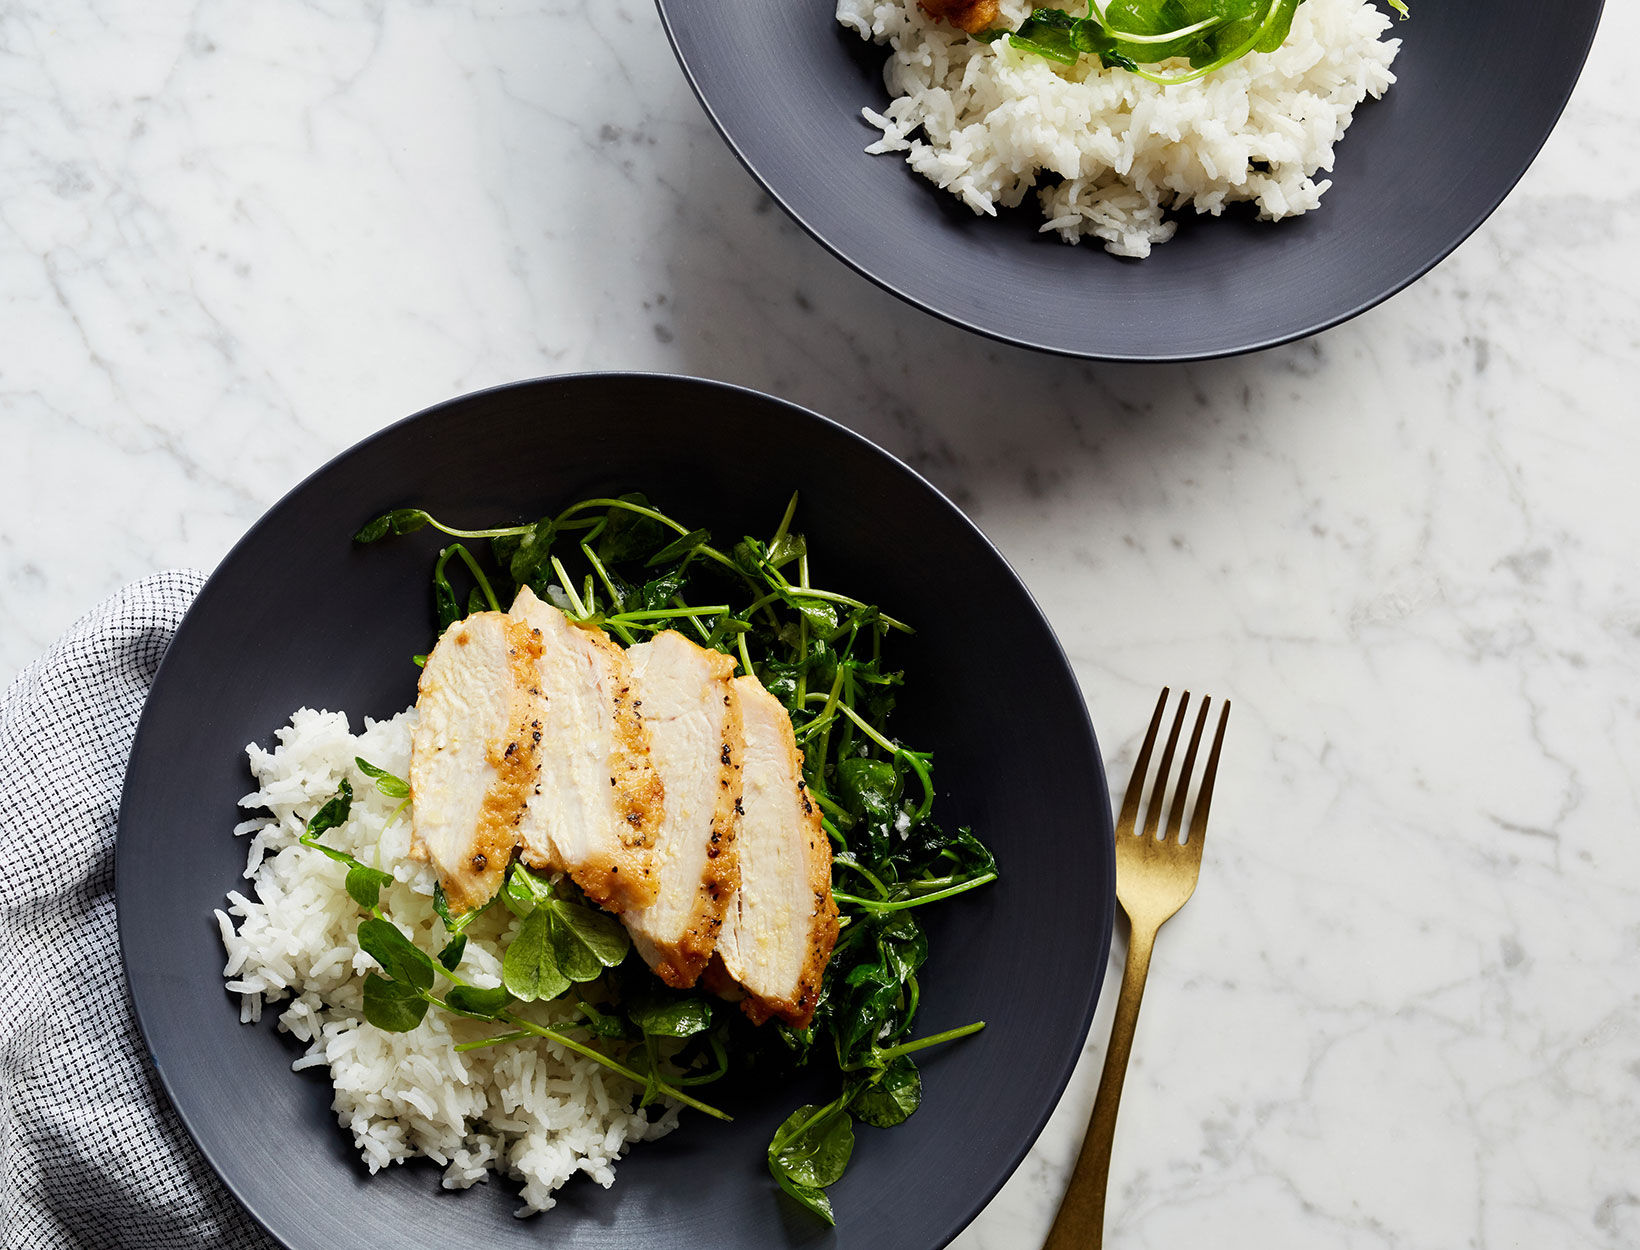 Crispy Chicken with Garlicky Pea Shoots